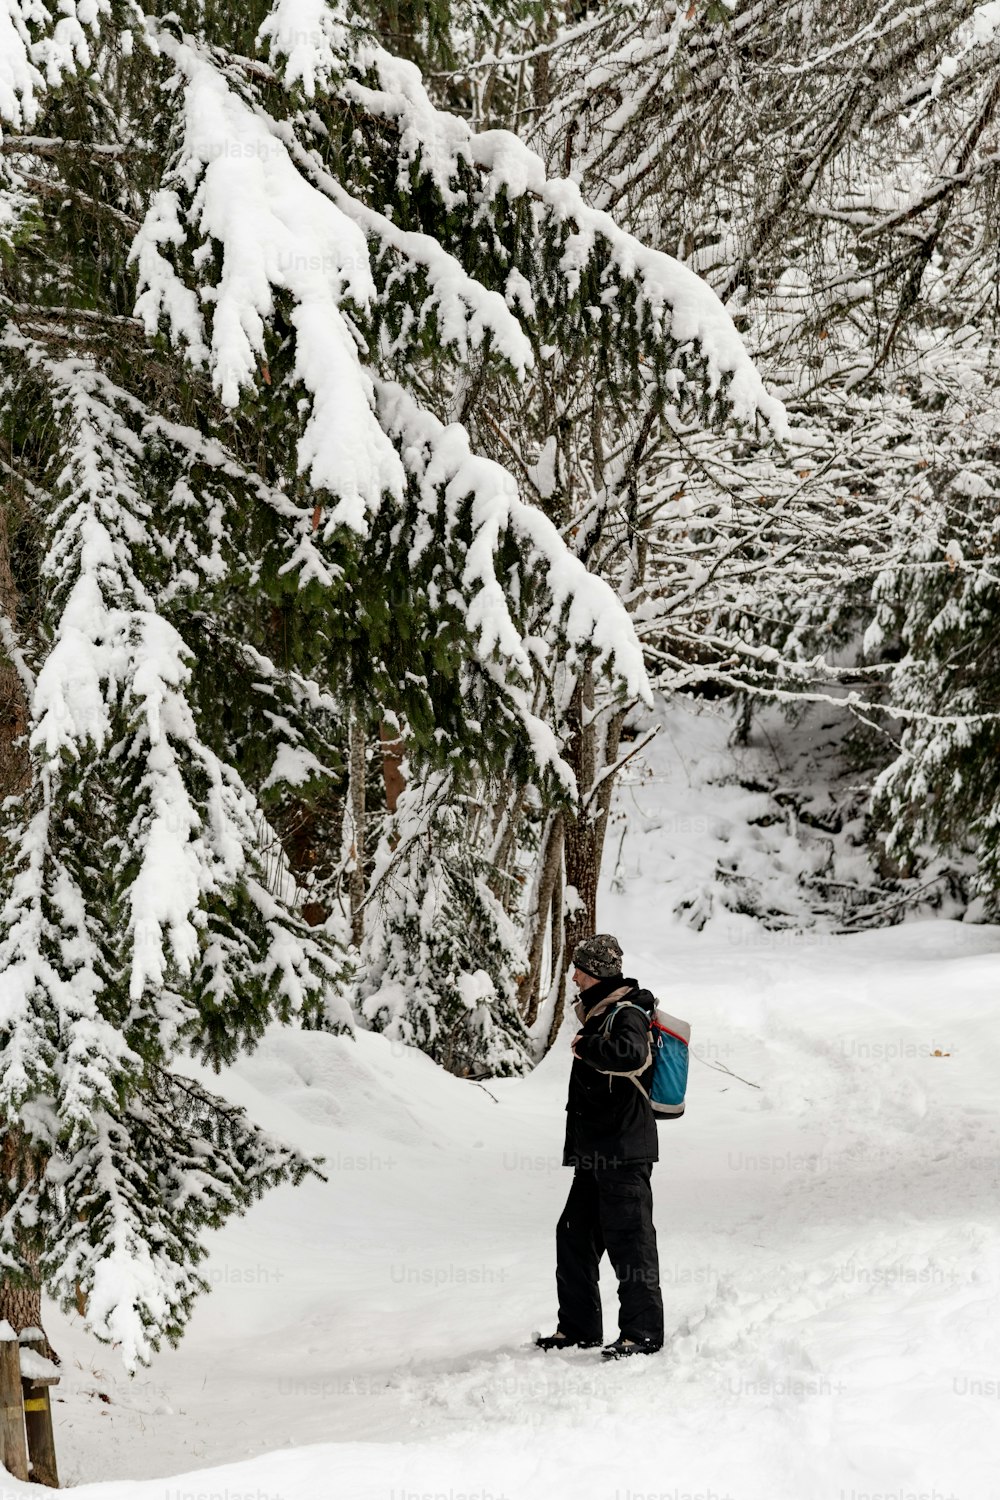 a person walking in the snow carrying a backpack